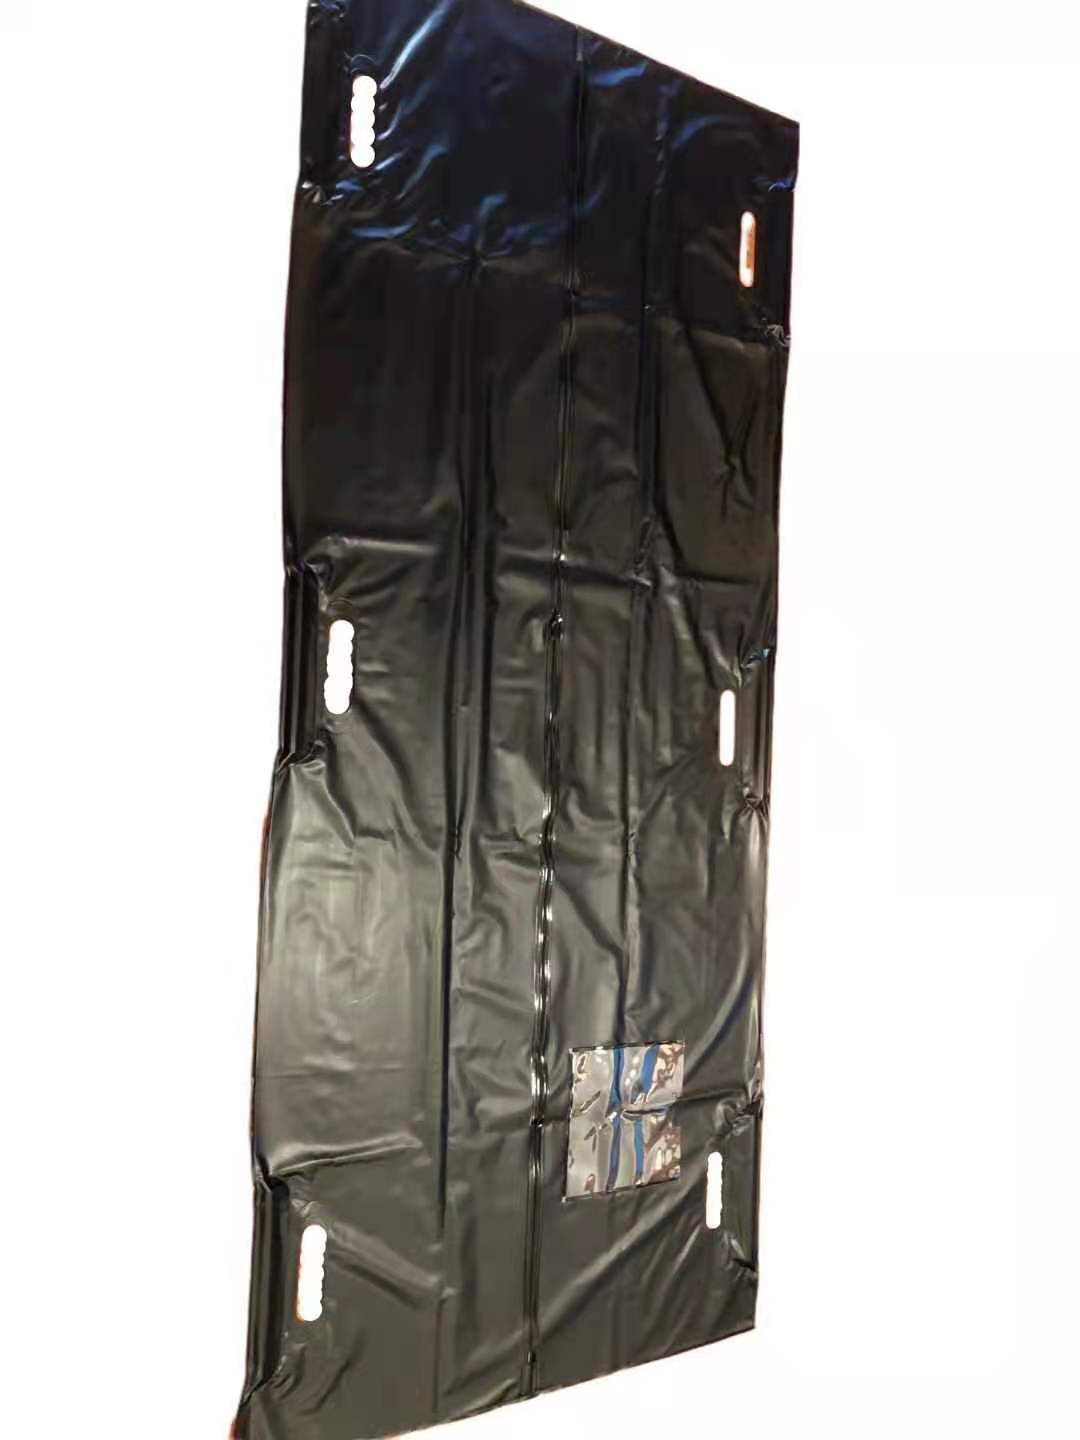 PVC Corpse Cadaver Body Bags for Dead Bodies